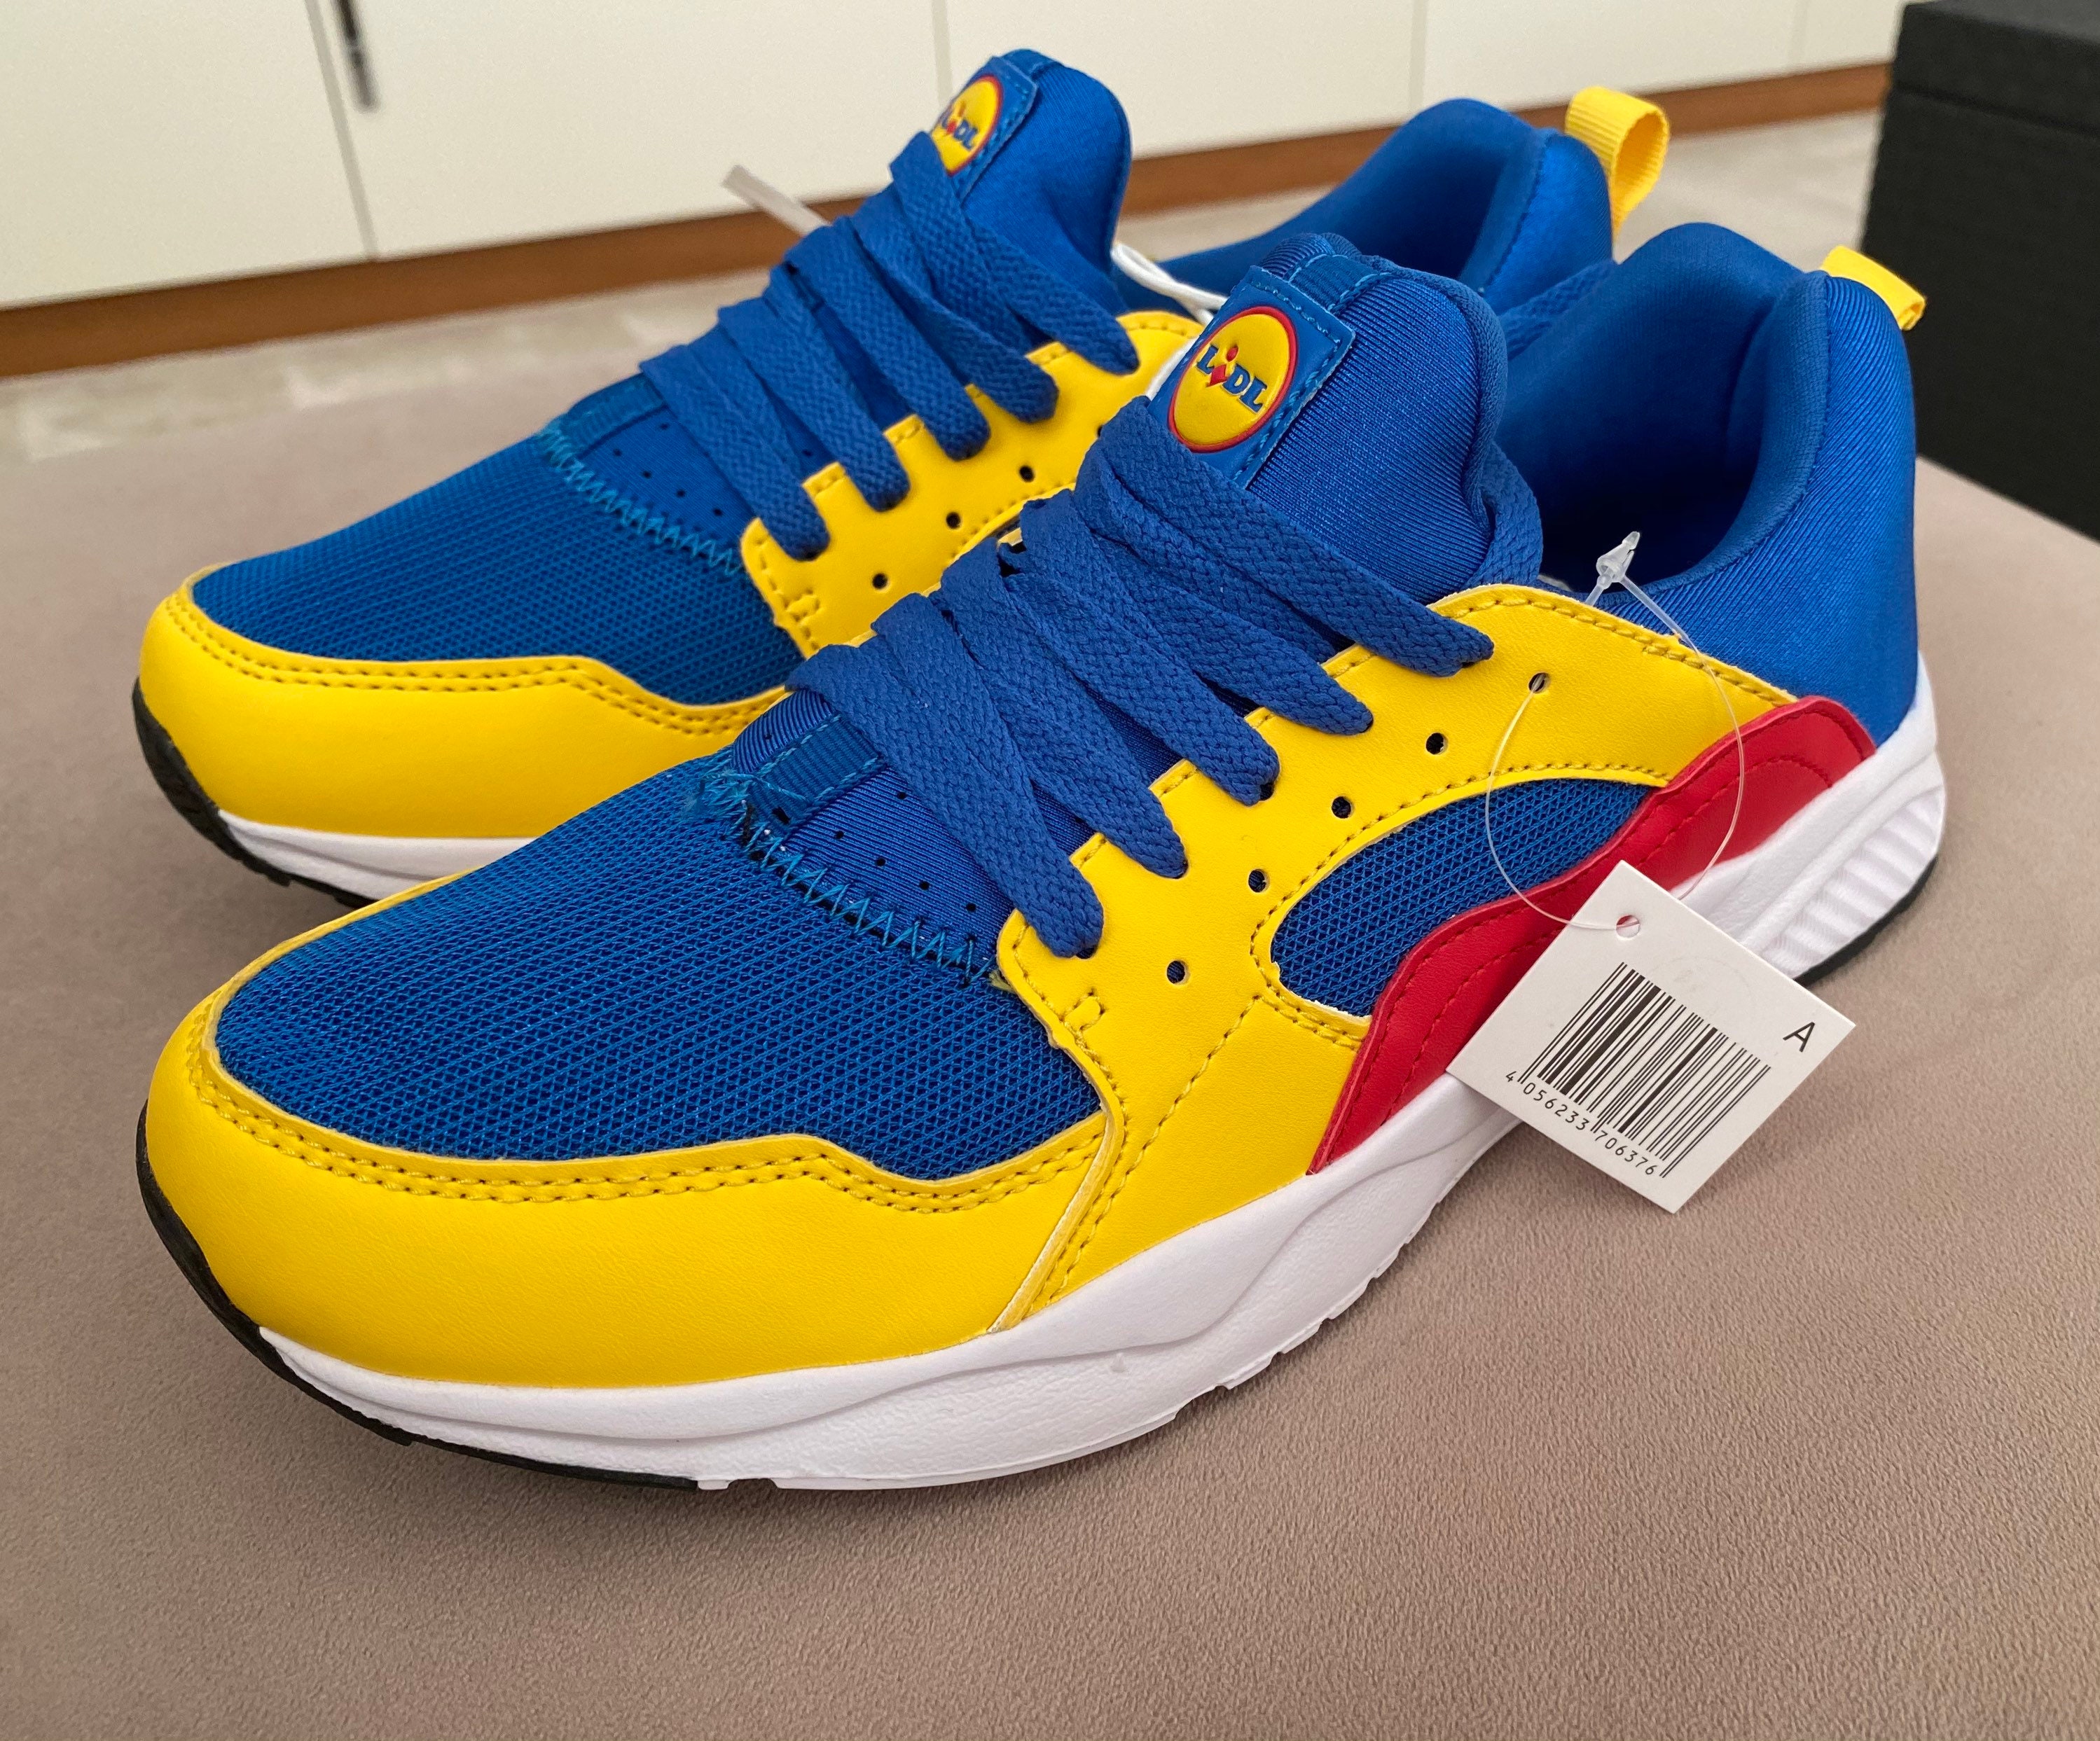 Lidl limited edition trainers 